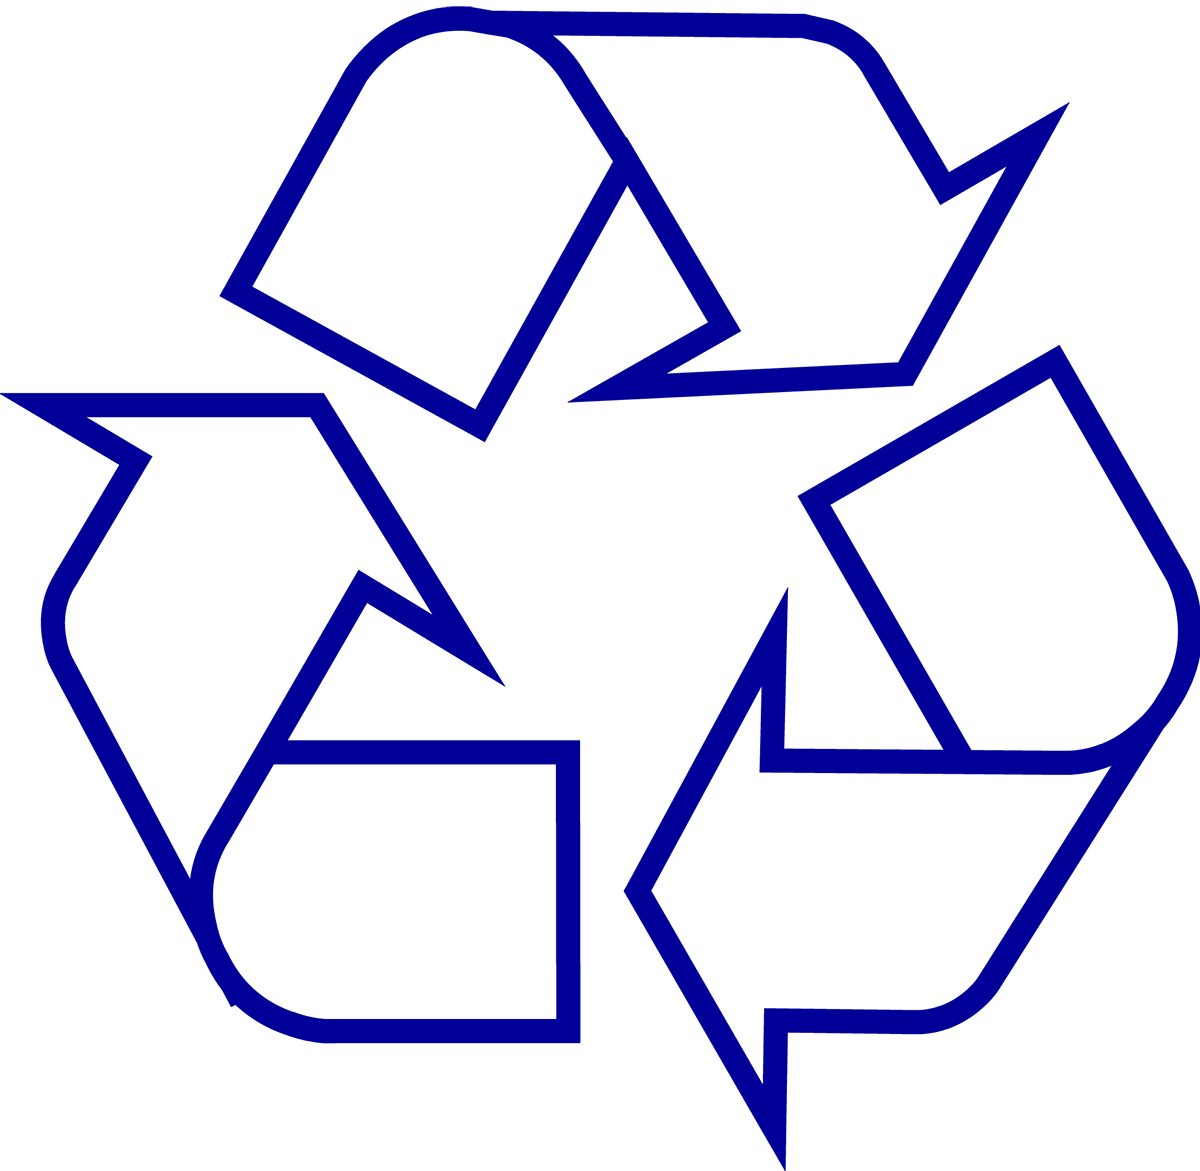 Dark Blue and White Logo - Recycling Symbol - Download the Original Recycle Logo